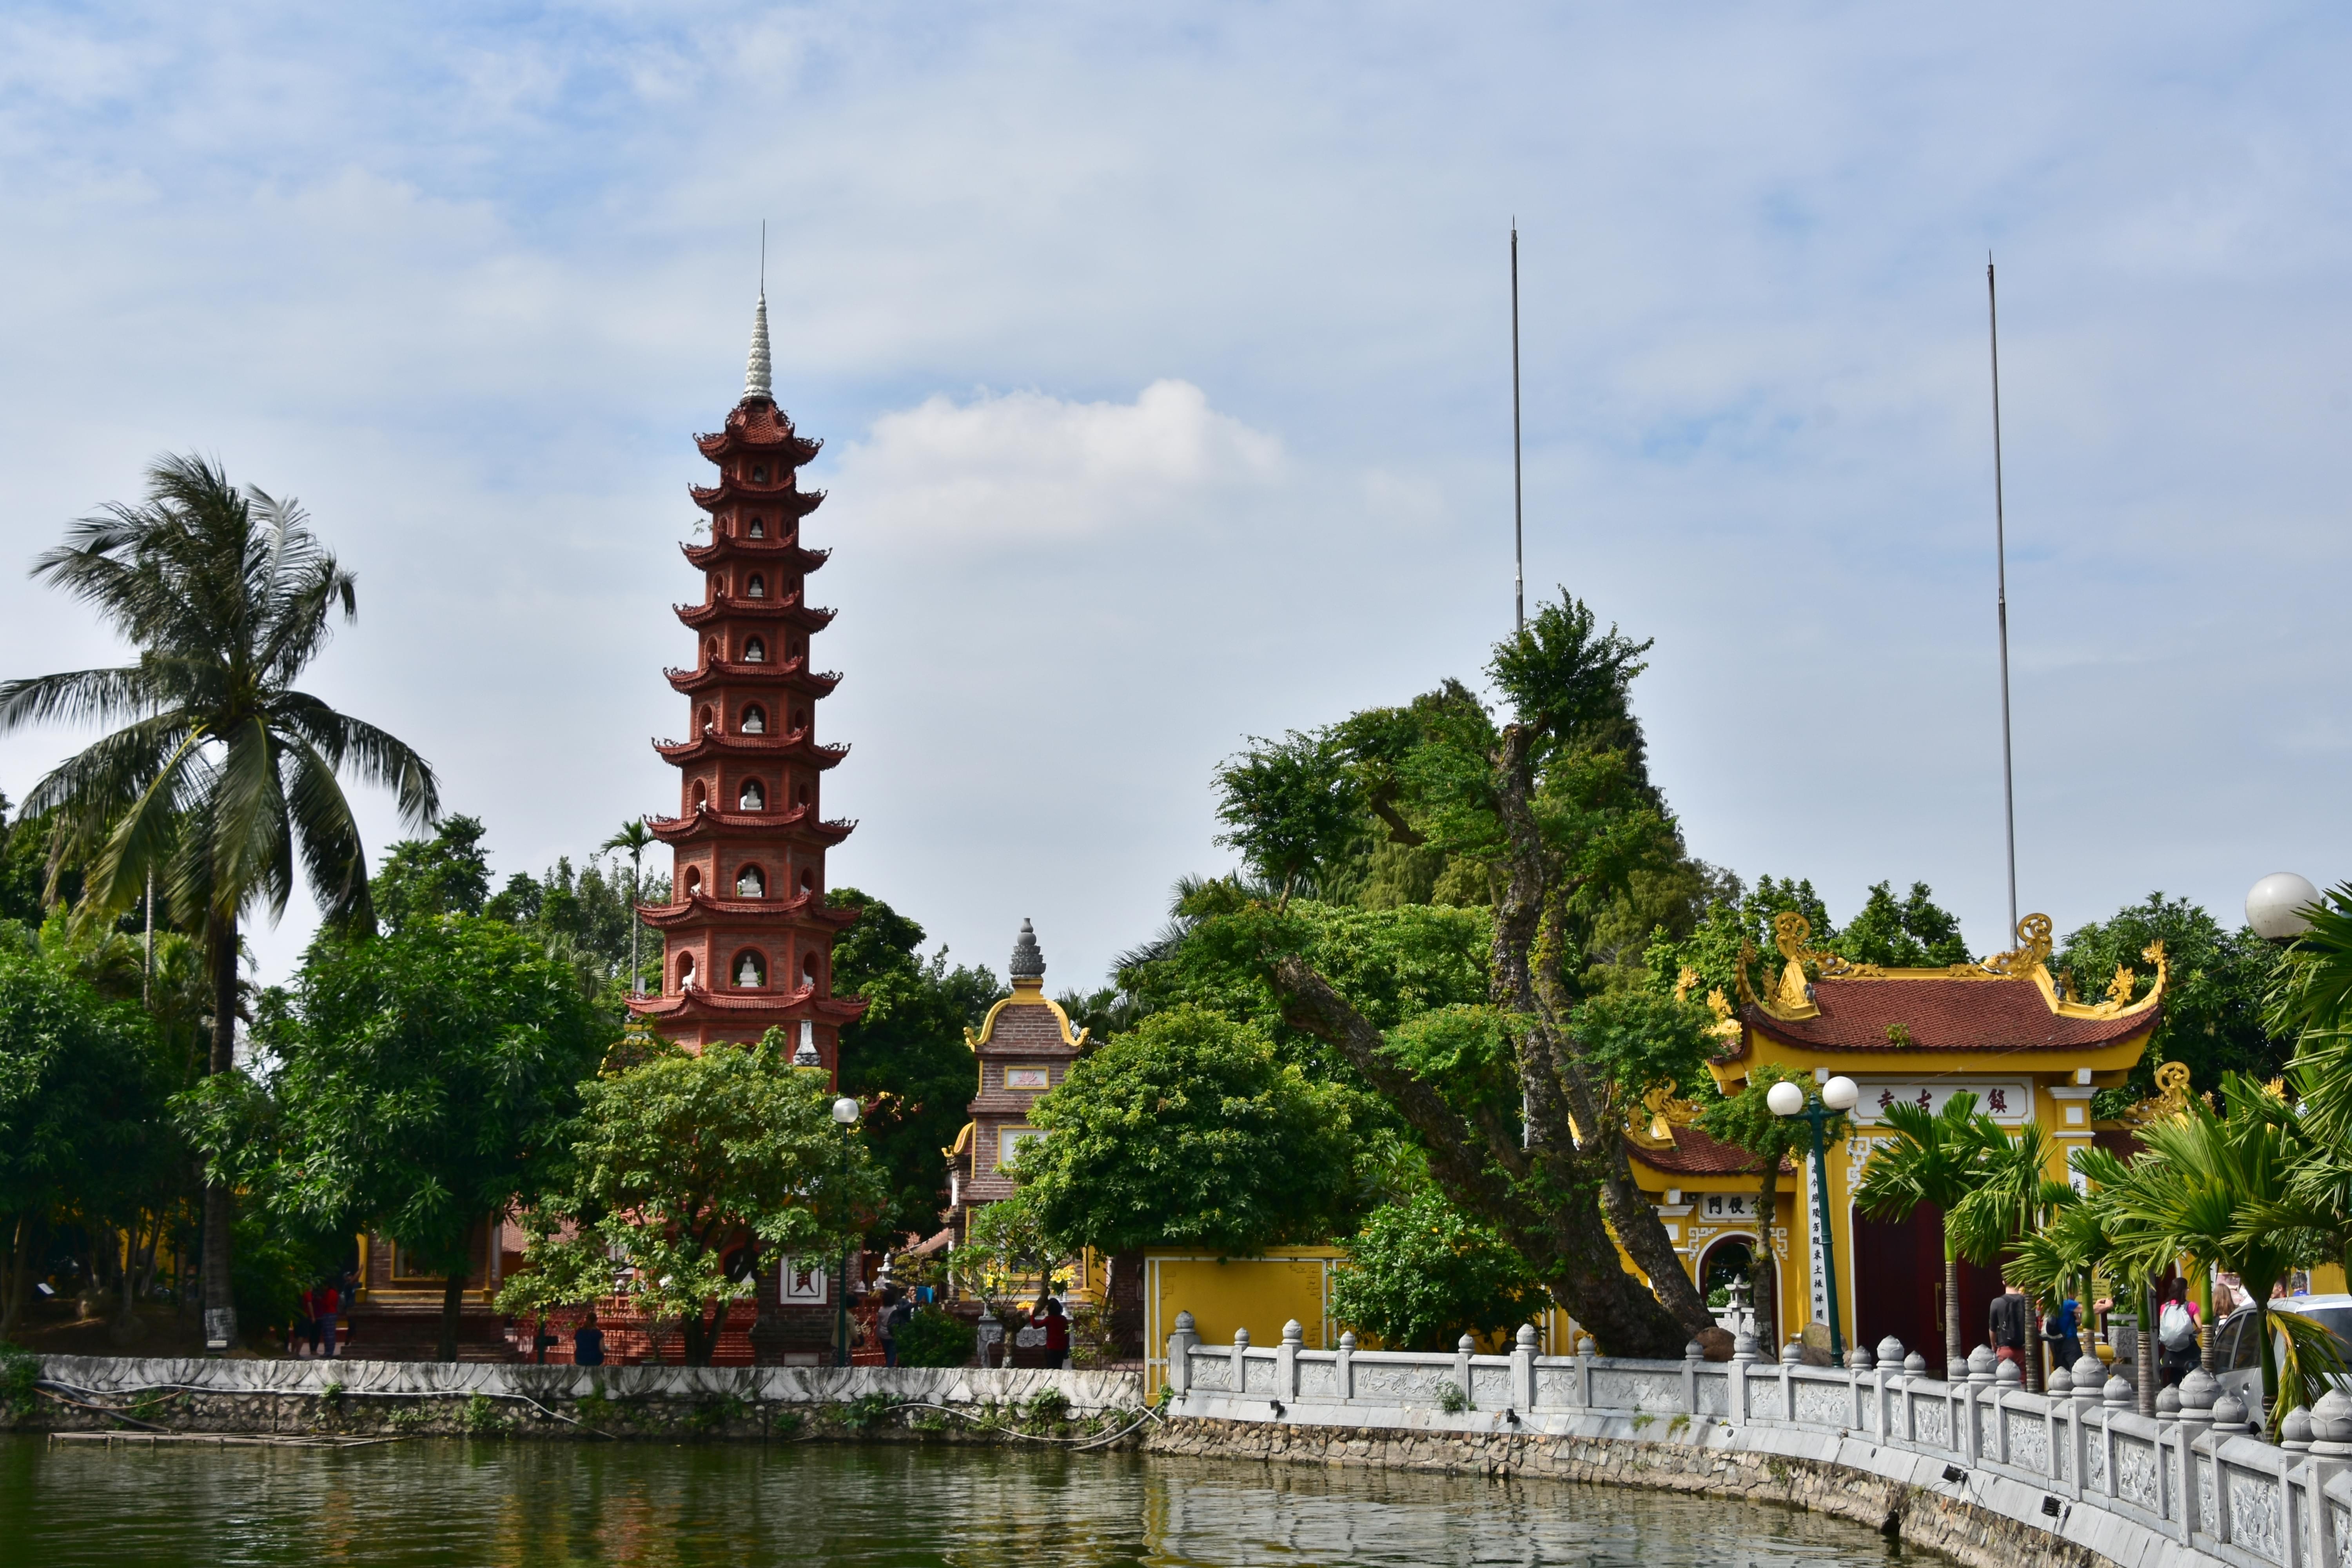 Pay your visit to the Tran Quoc Pagoda